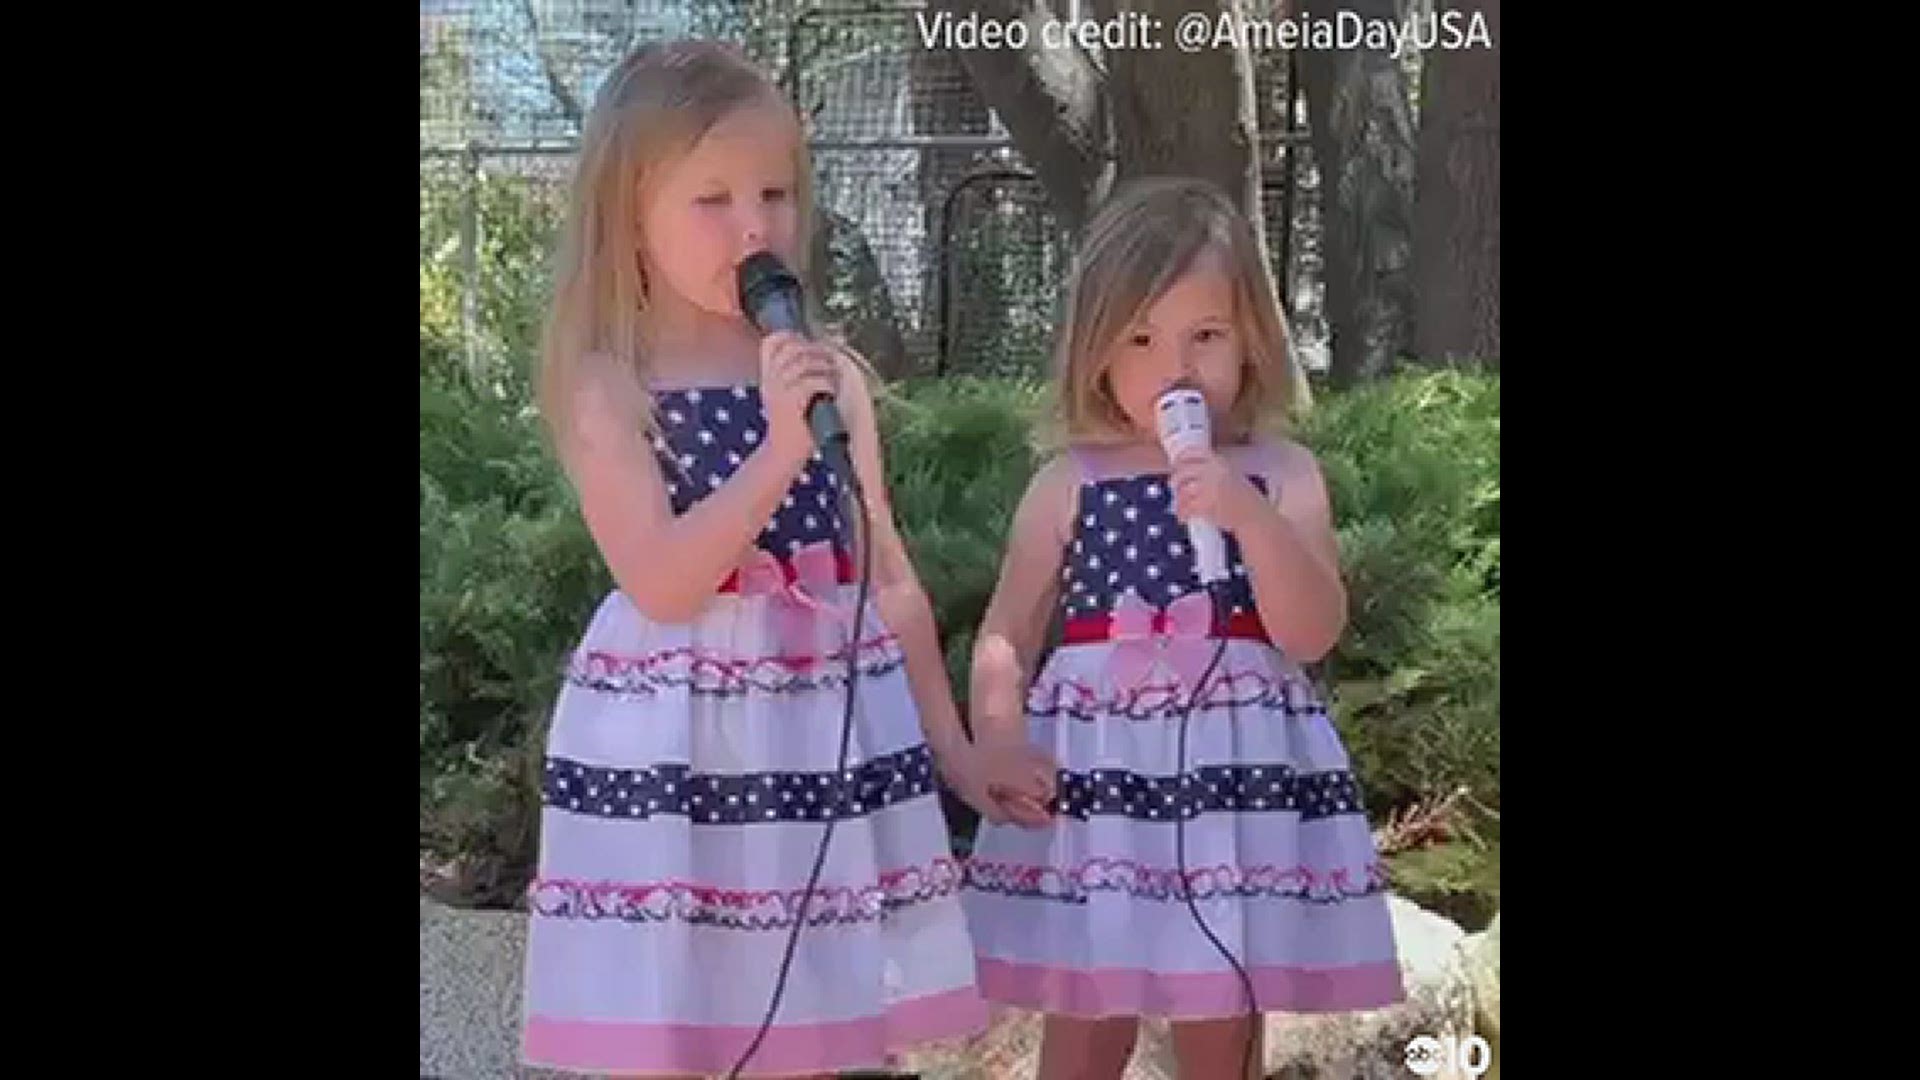 4-year-old Amelia sings God Bless America in honor of Memorial Day 2021 with her sister. Amelia stole our hearts by singing the national anthem on Memorial Day 2019.